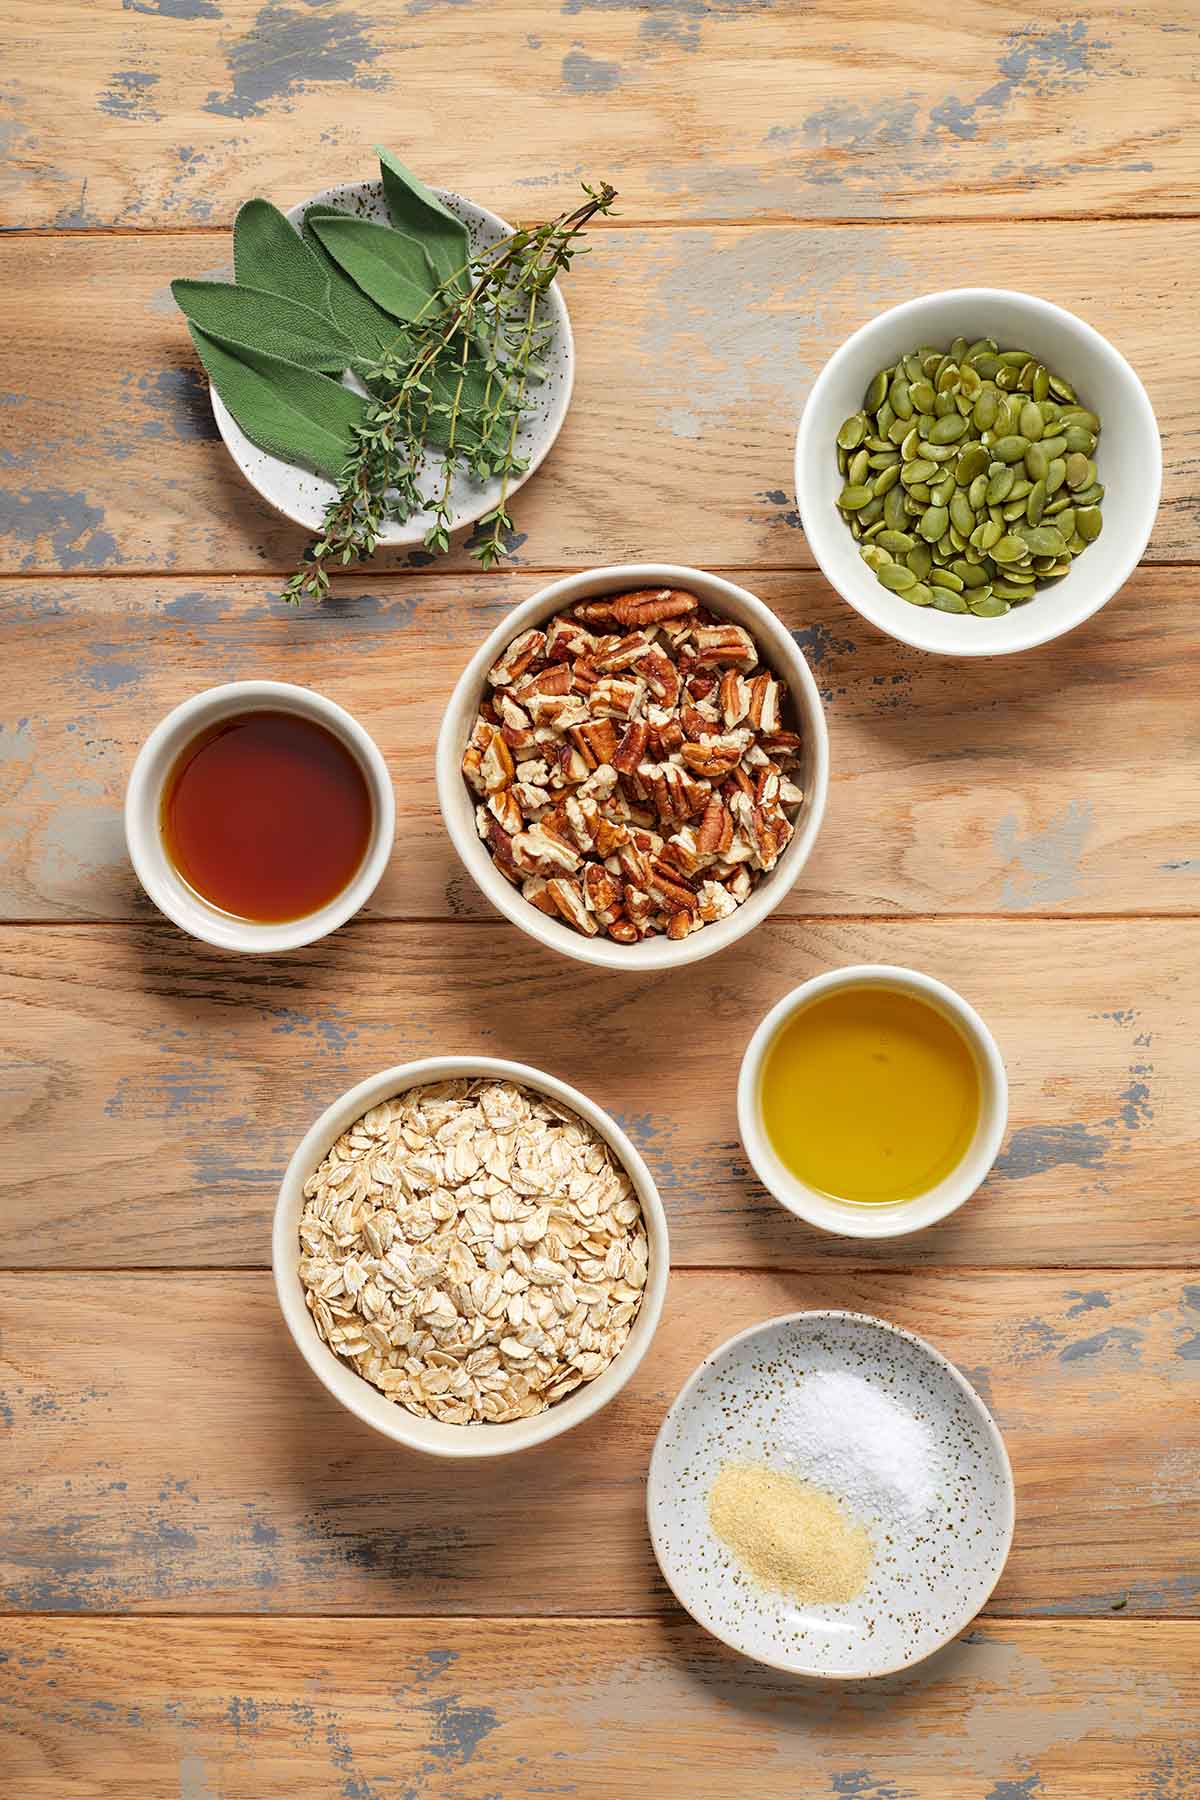 Ingredients to make savory granola arranged individually on a wooden table.